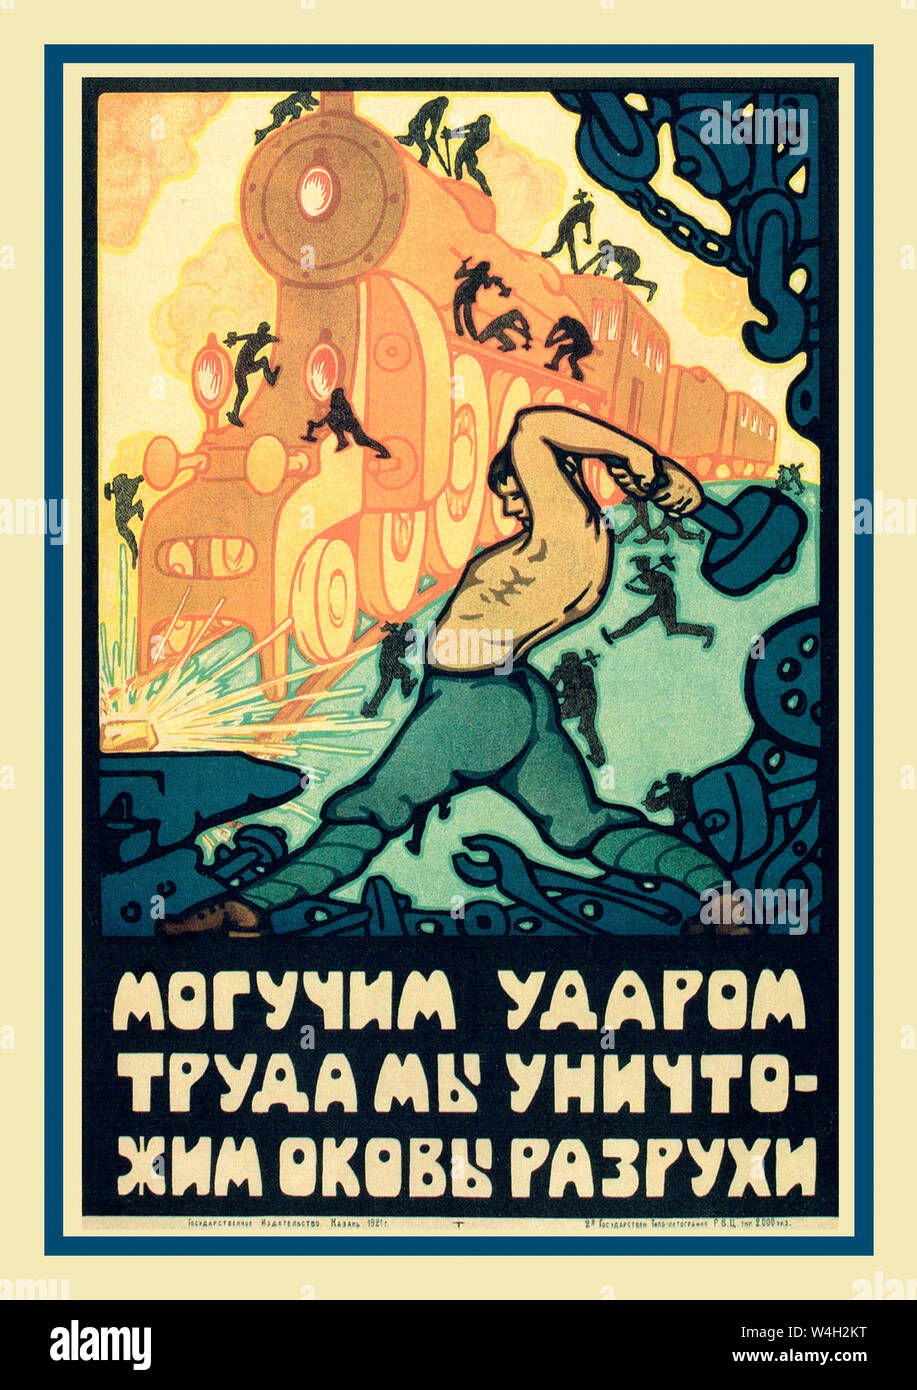 Vintage 1921 Propaganda Workers Revolution Russian Soviet Poster “By a powerful strike of labor, we will destroy the shackles of devastation.' Soviet Union, early 20thC 1921 'A joint effort will raise the country from the ruins', 1920s Stock Photo